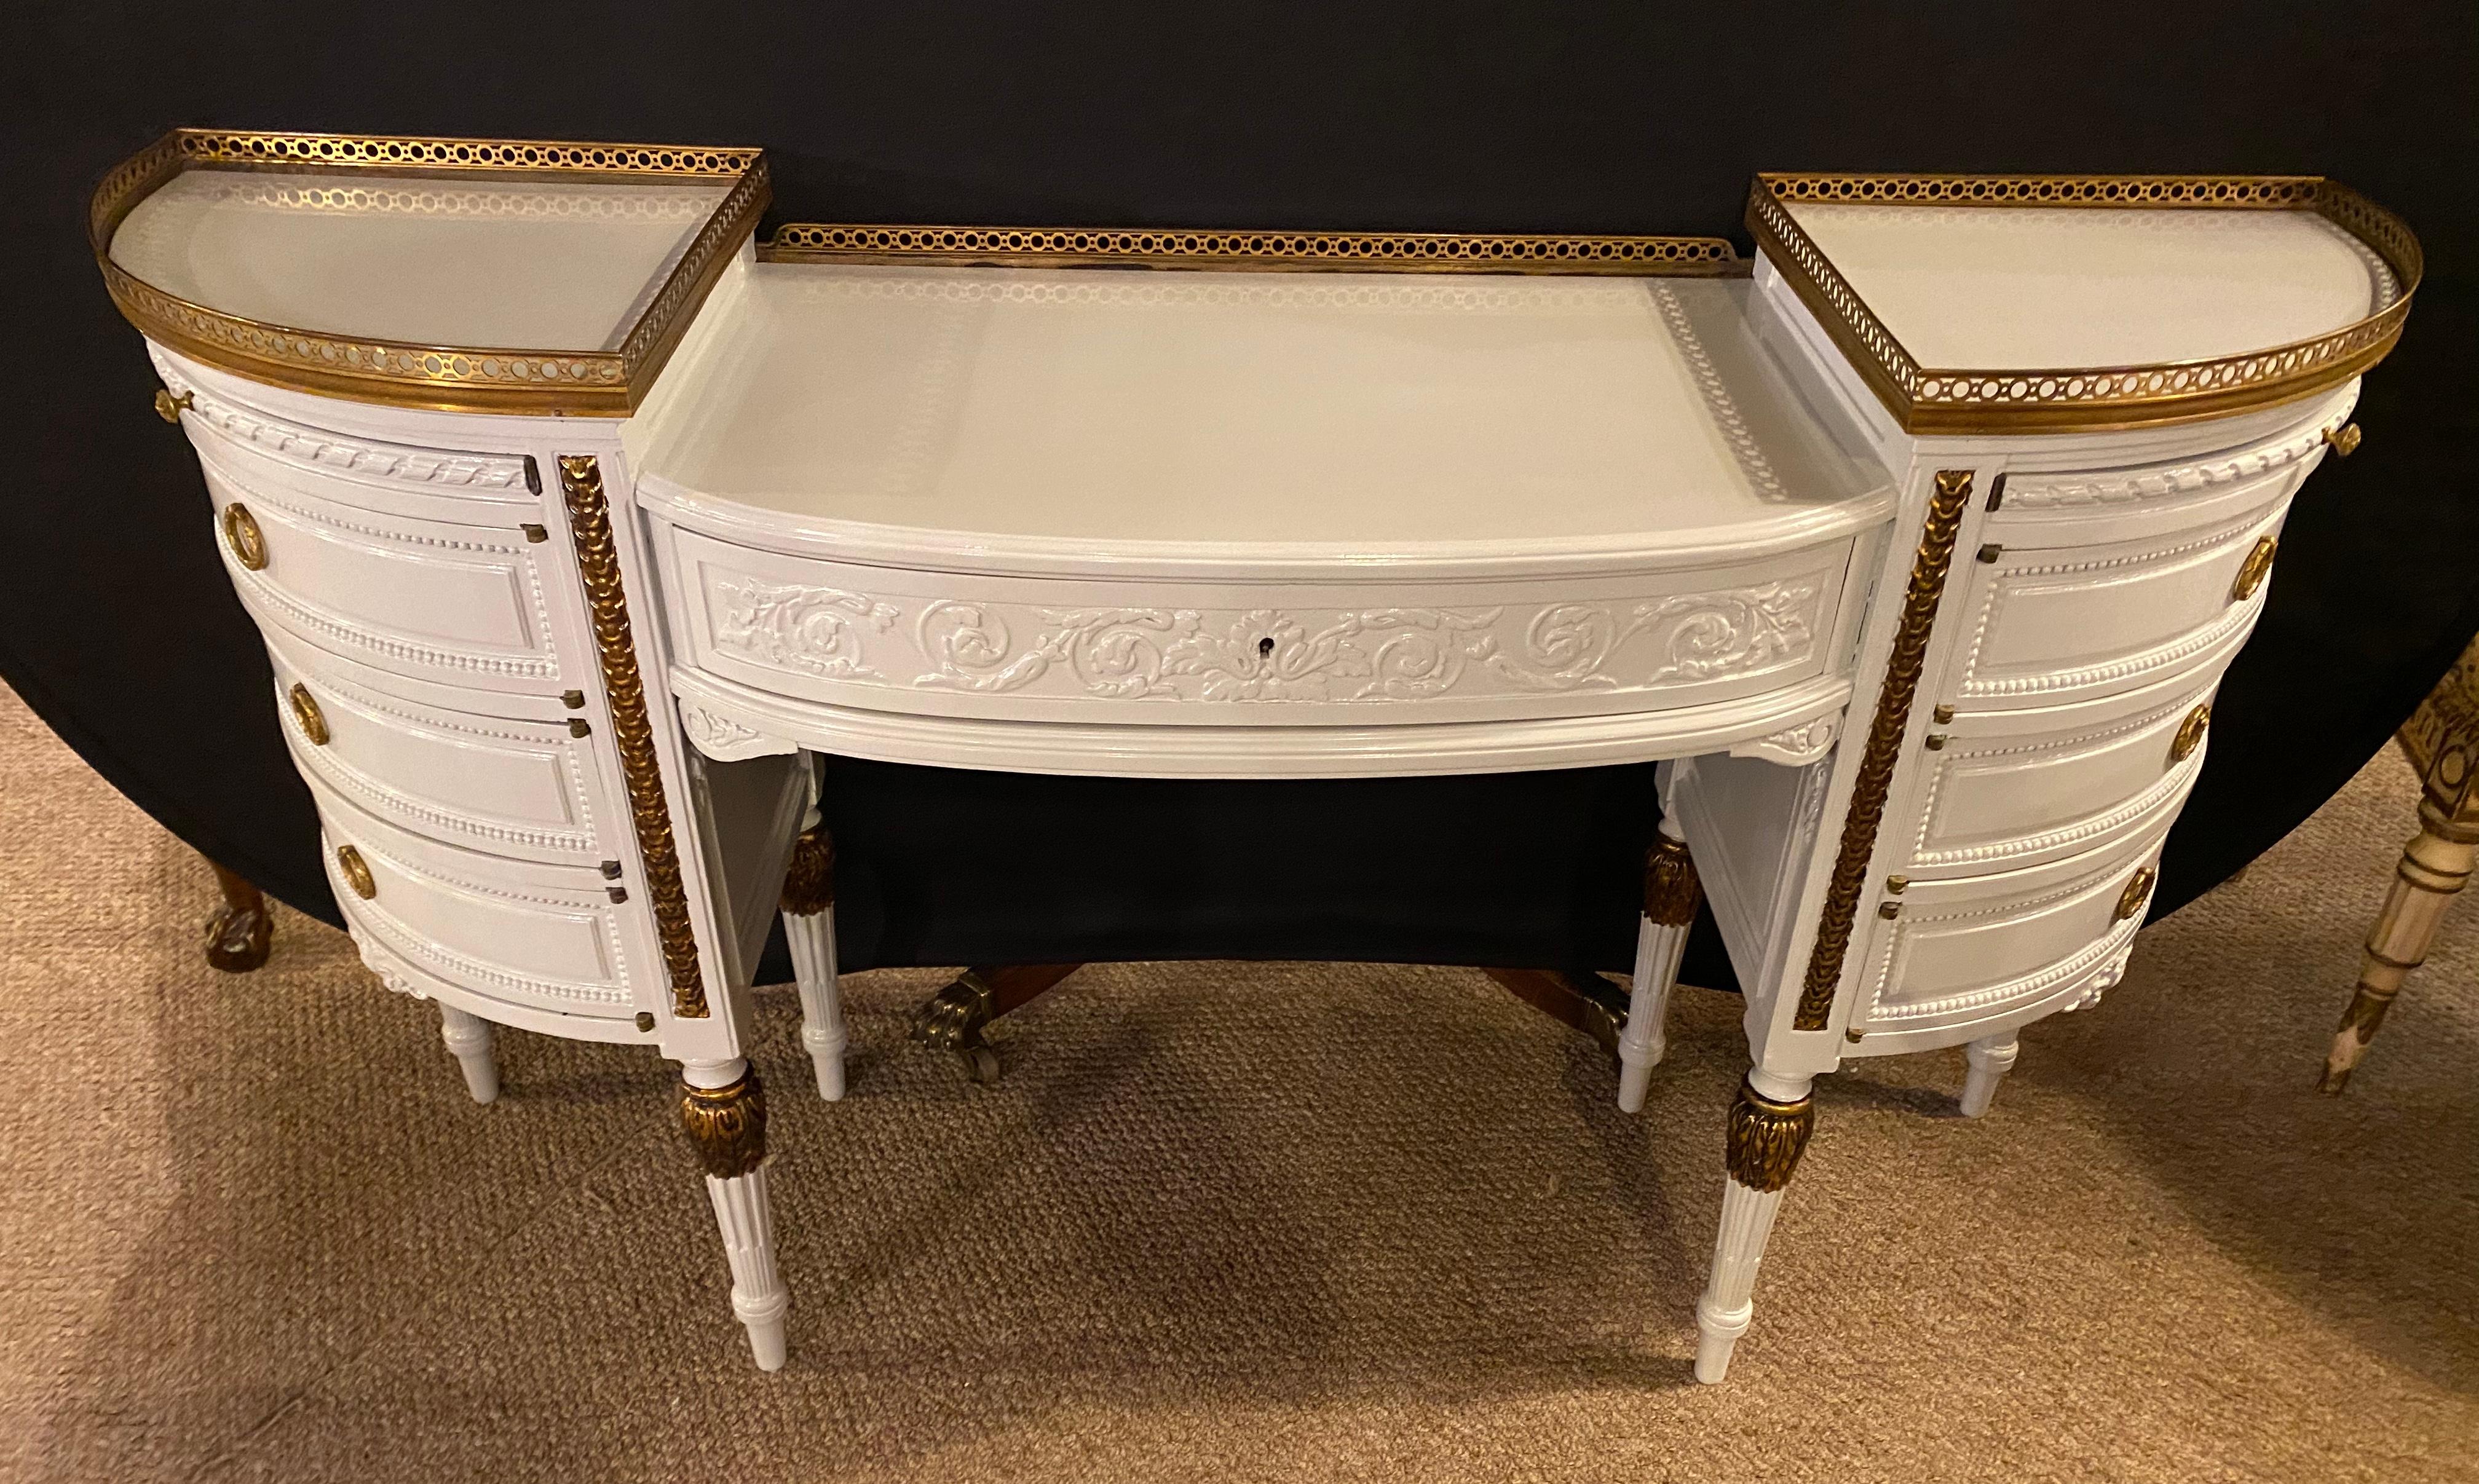 Louis XVI style ladies vanity / writing desk in dove gray lacquer and parcel-gilt gold finish. This spectacularly bronze mounted ladies desk or dressing vanity depicts the Hollywood Regency era at its peak. The fine, recently redone case, has a